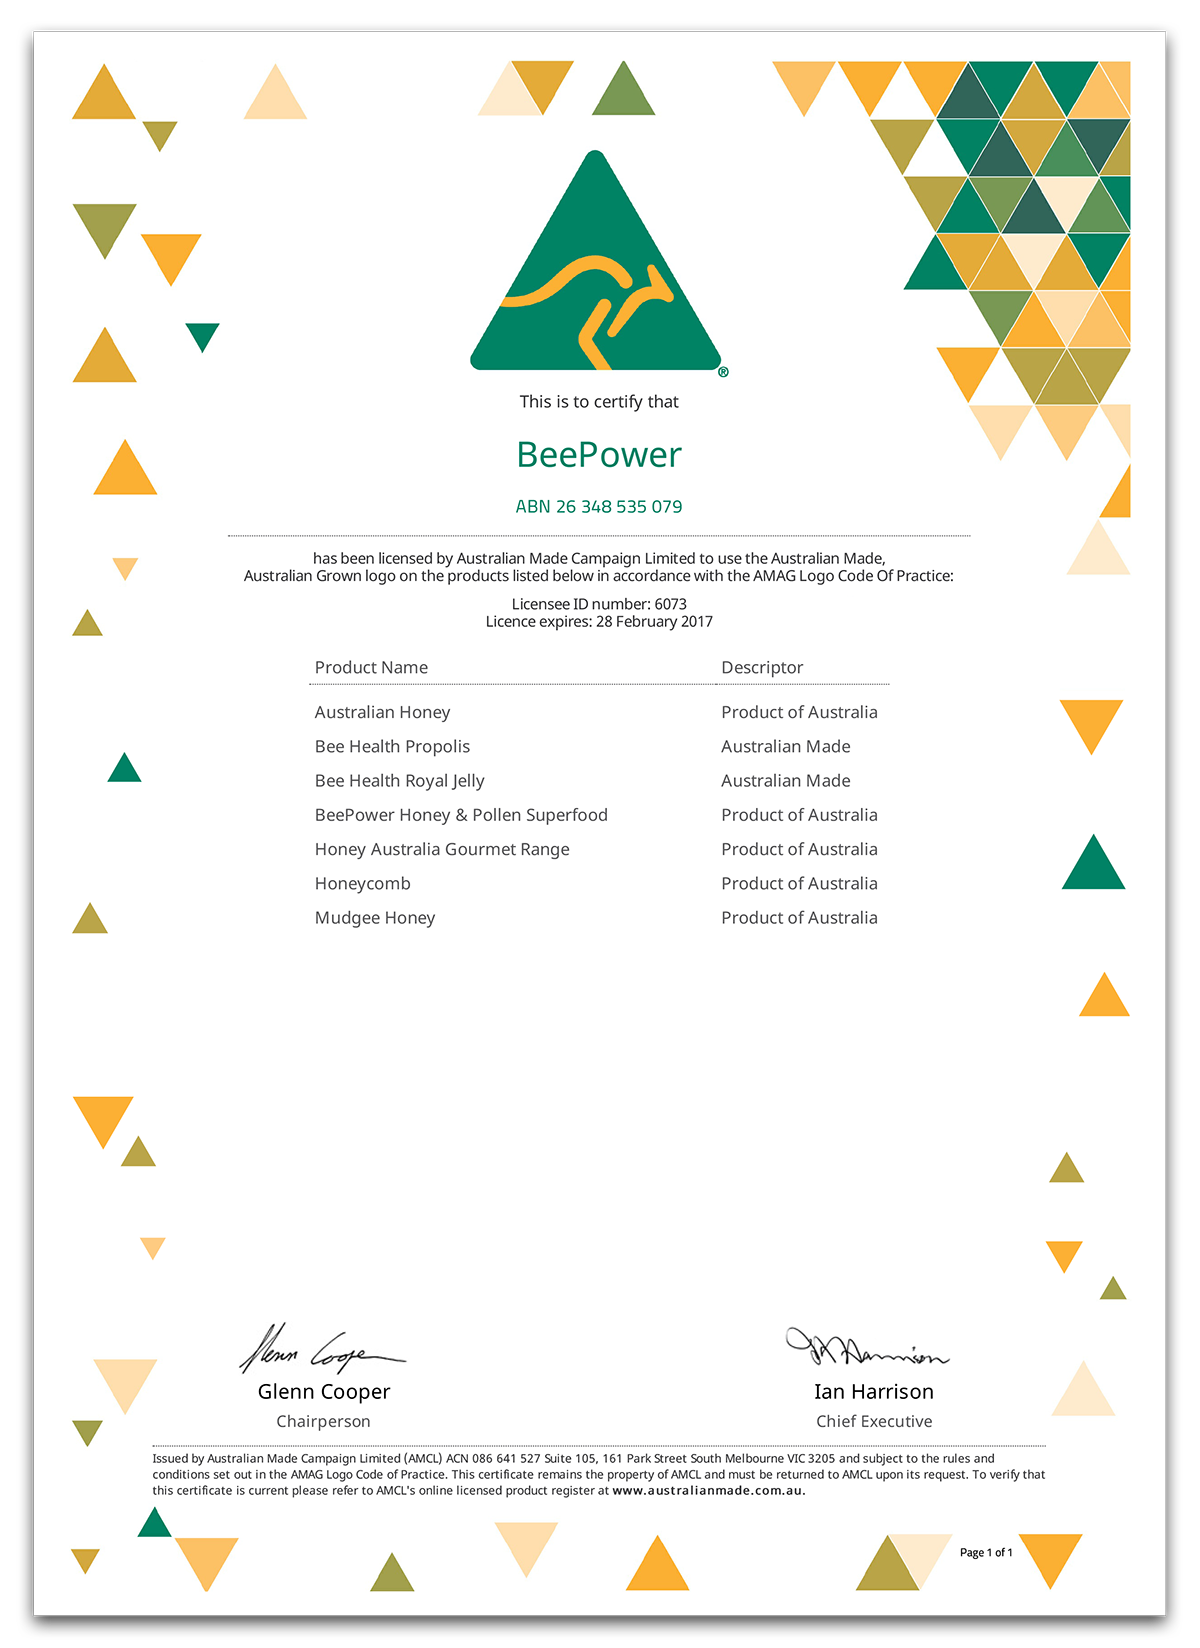 Beepower Honey is a certified Product of Australia 